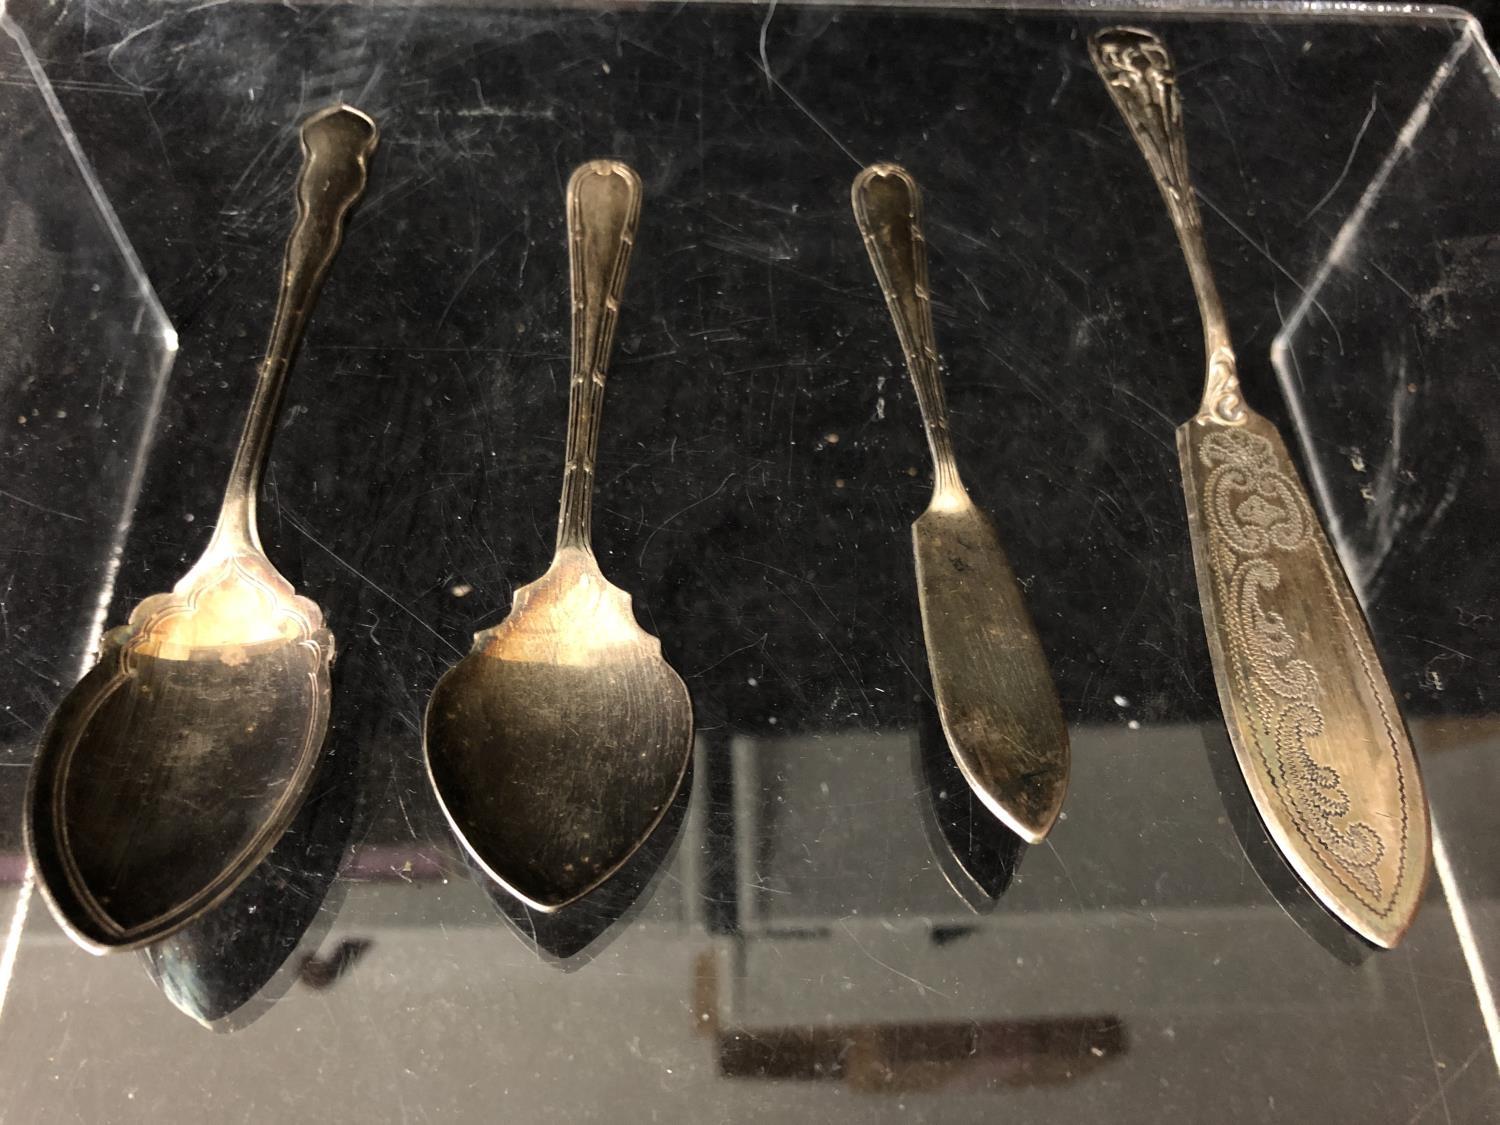 Four silver golf trophy spoons, the handles formed as a pair of golf clubs with single ball - Image 21 of 26